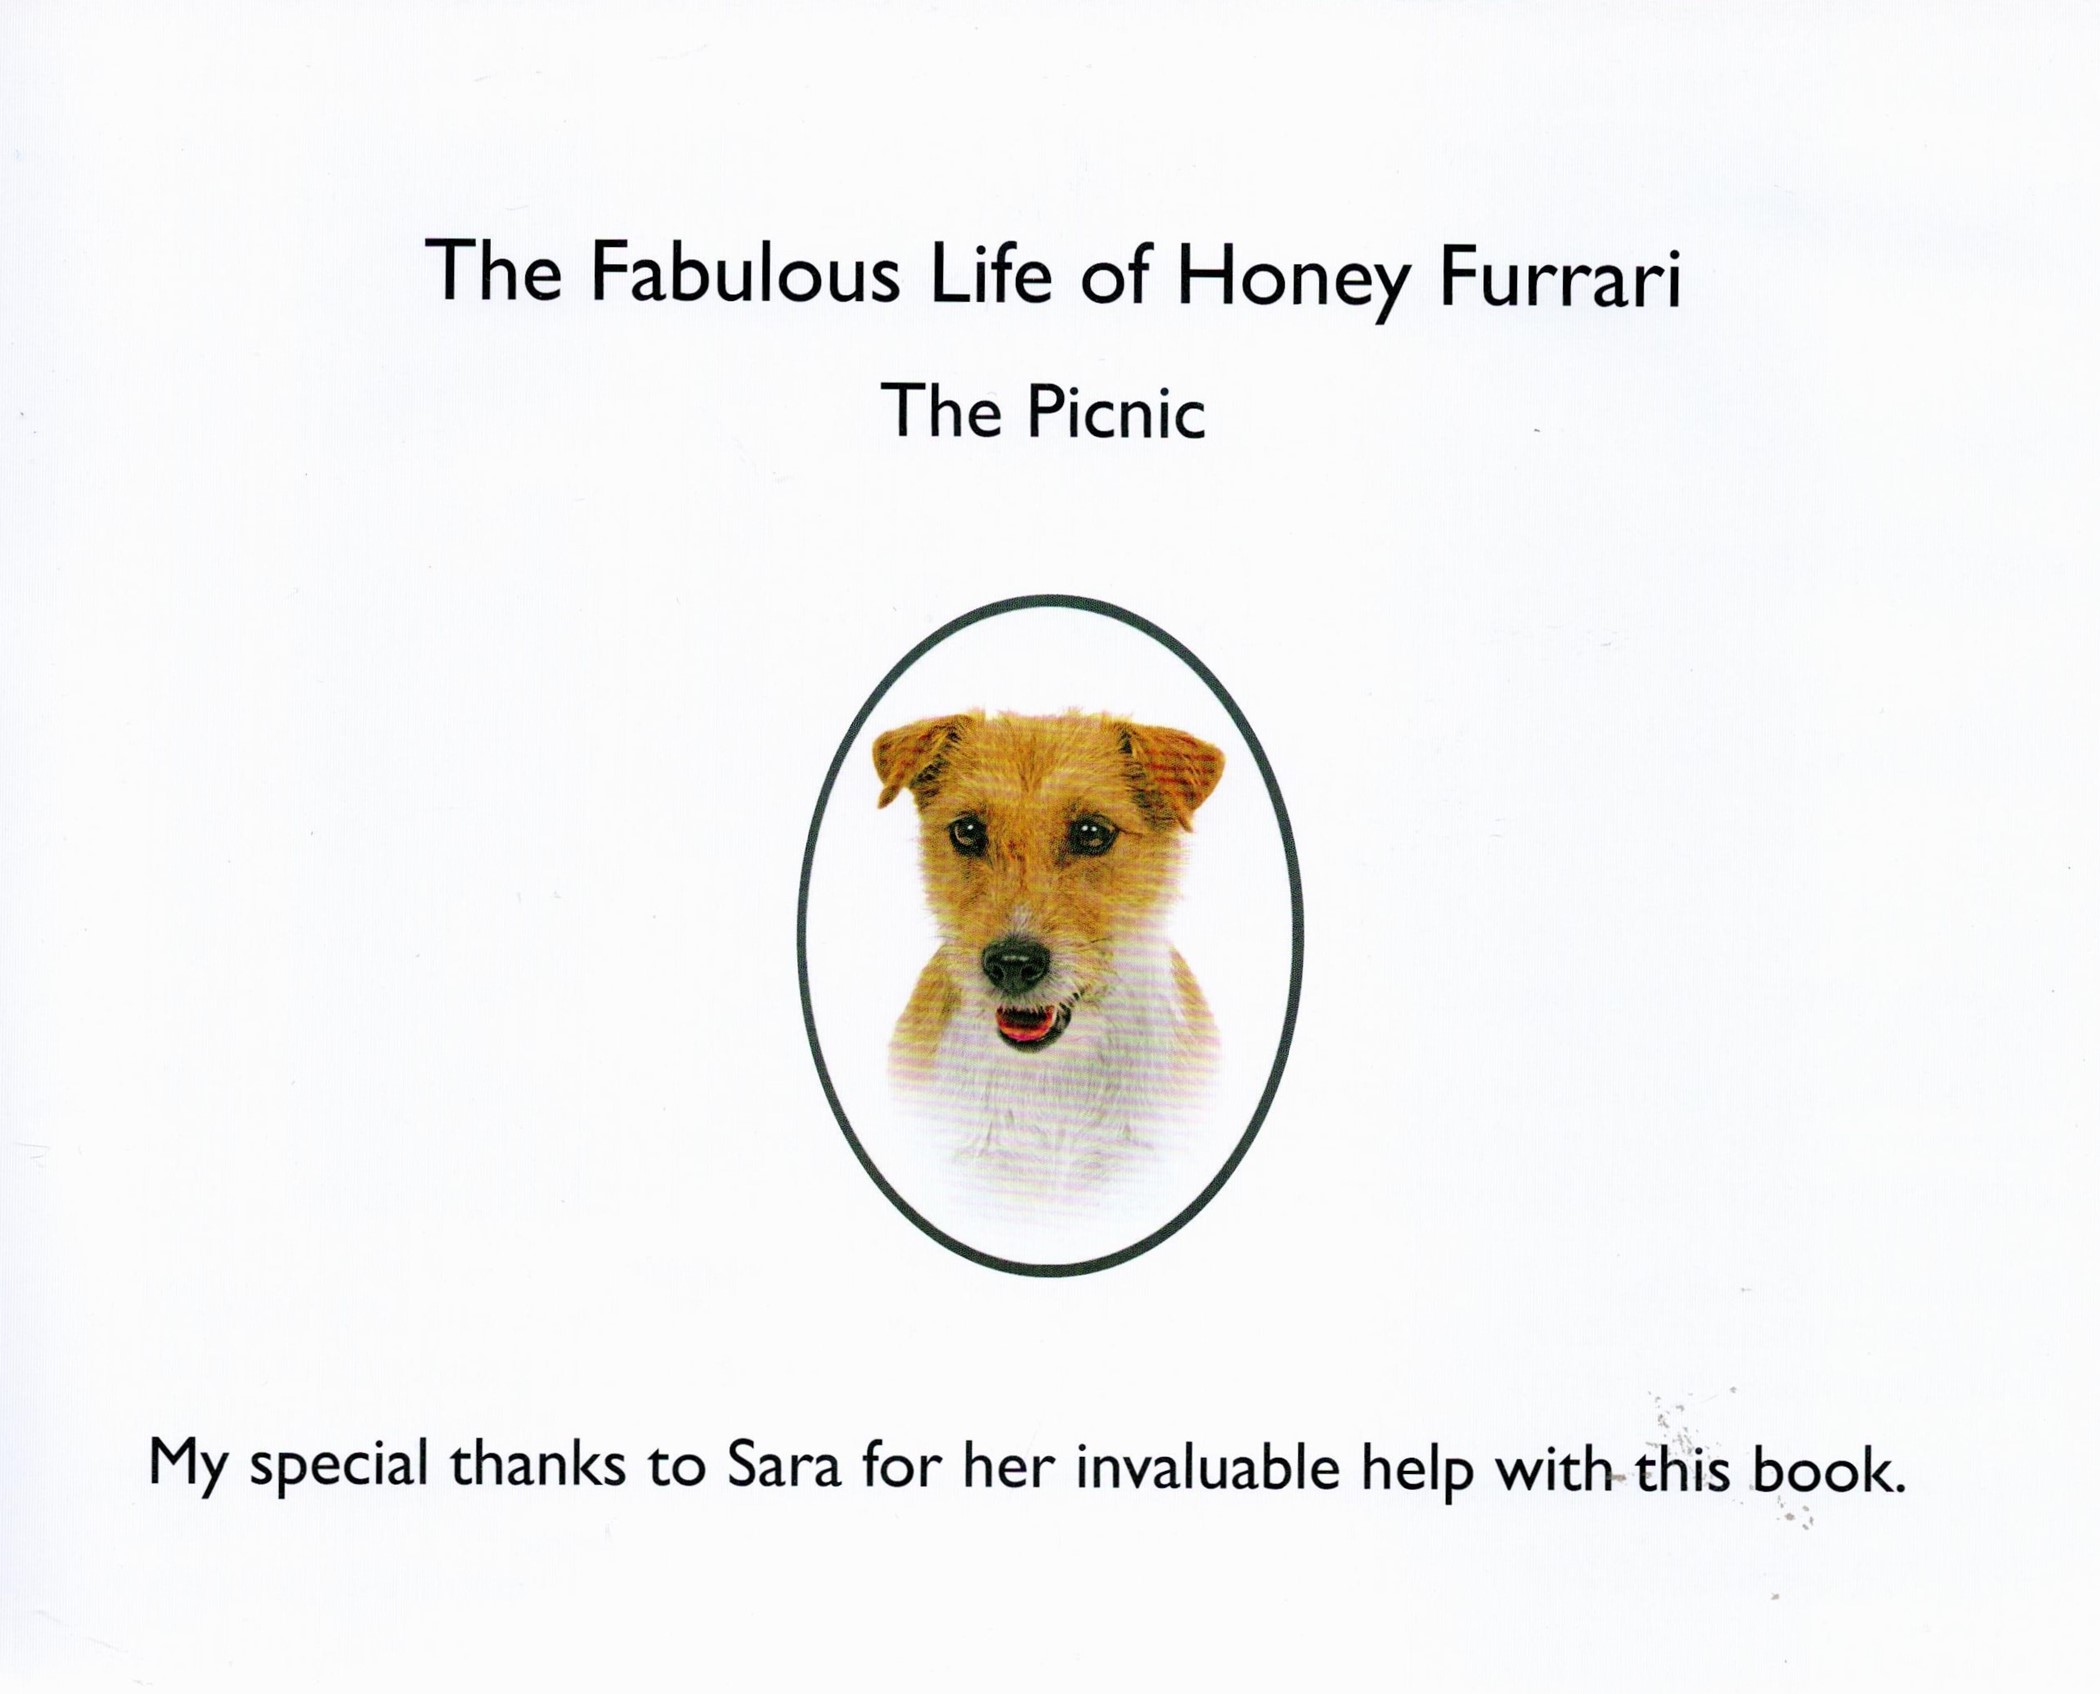 Signed Book Eileen Townend and Brooke West The Fabulous Life of Honey Furrari The Picnic 2010 - Image 4 of 5